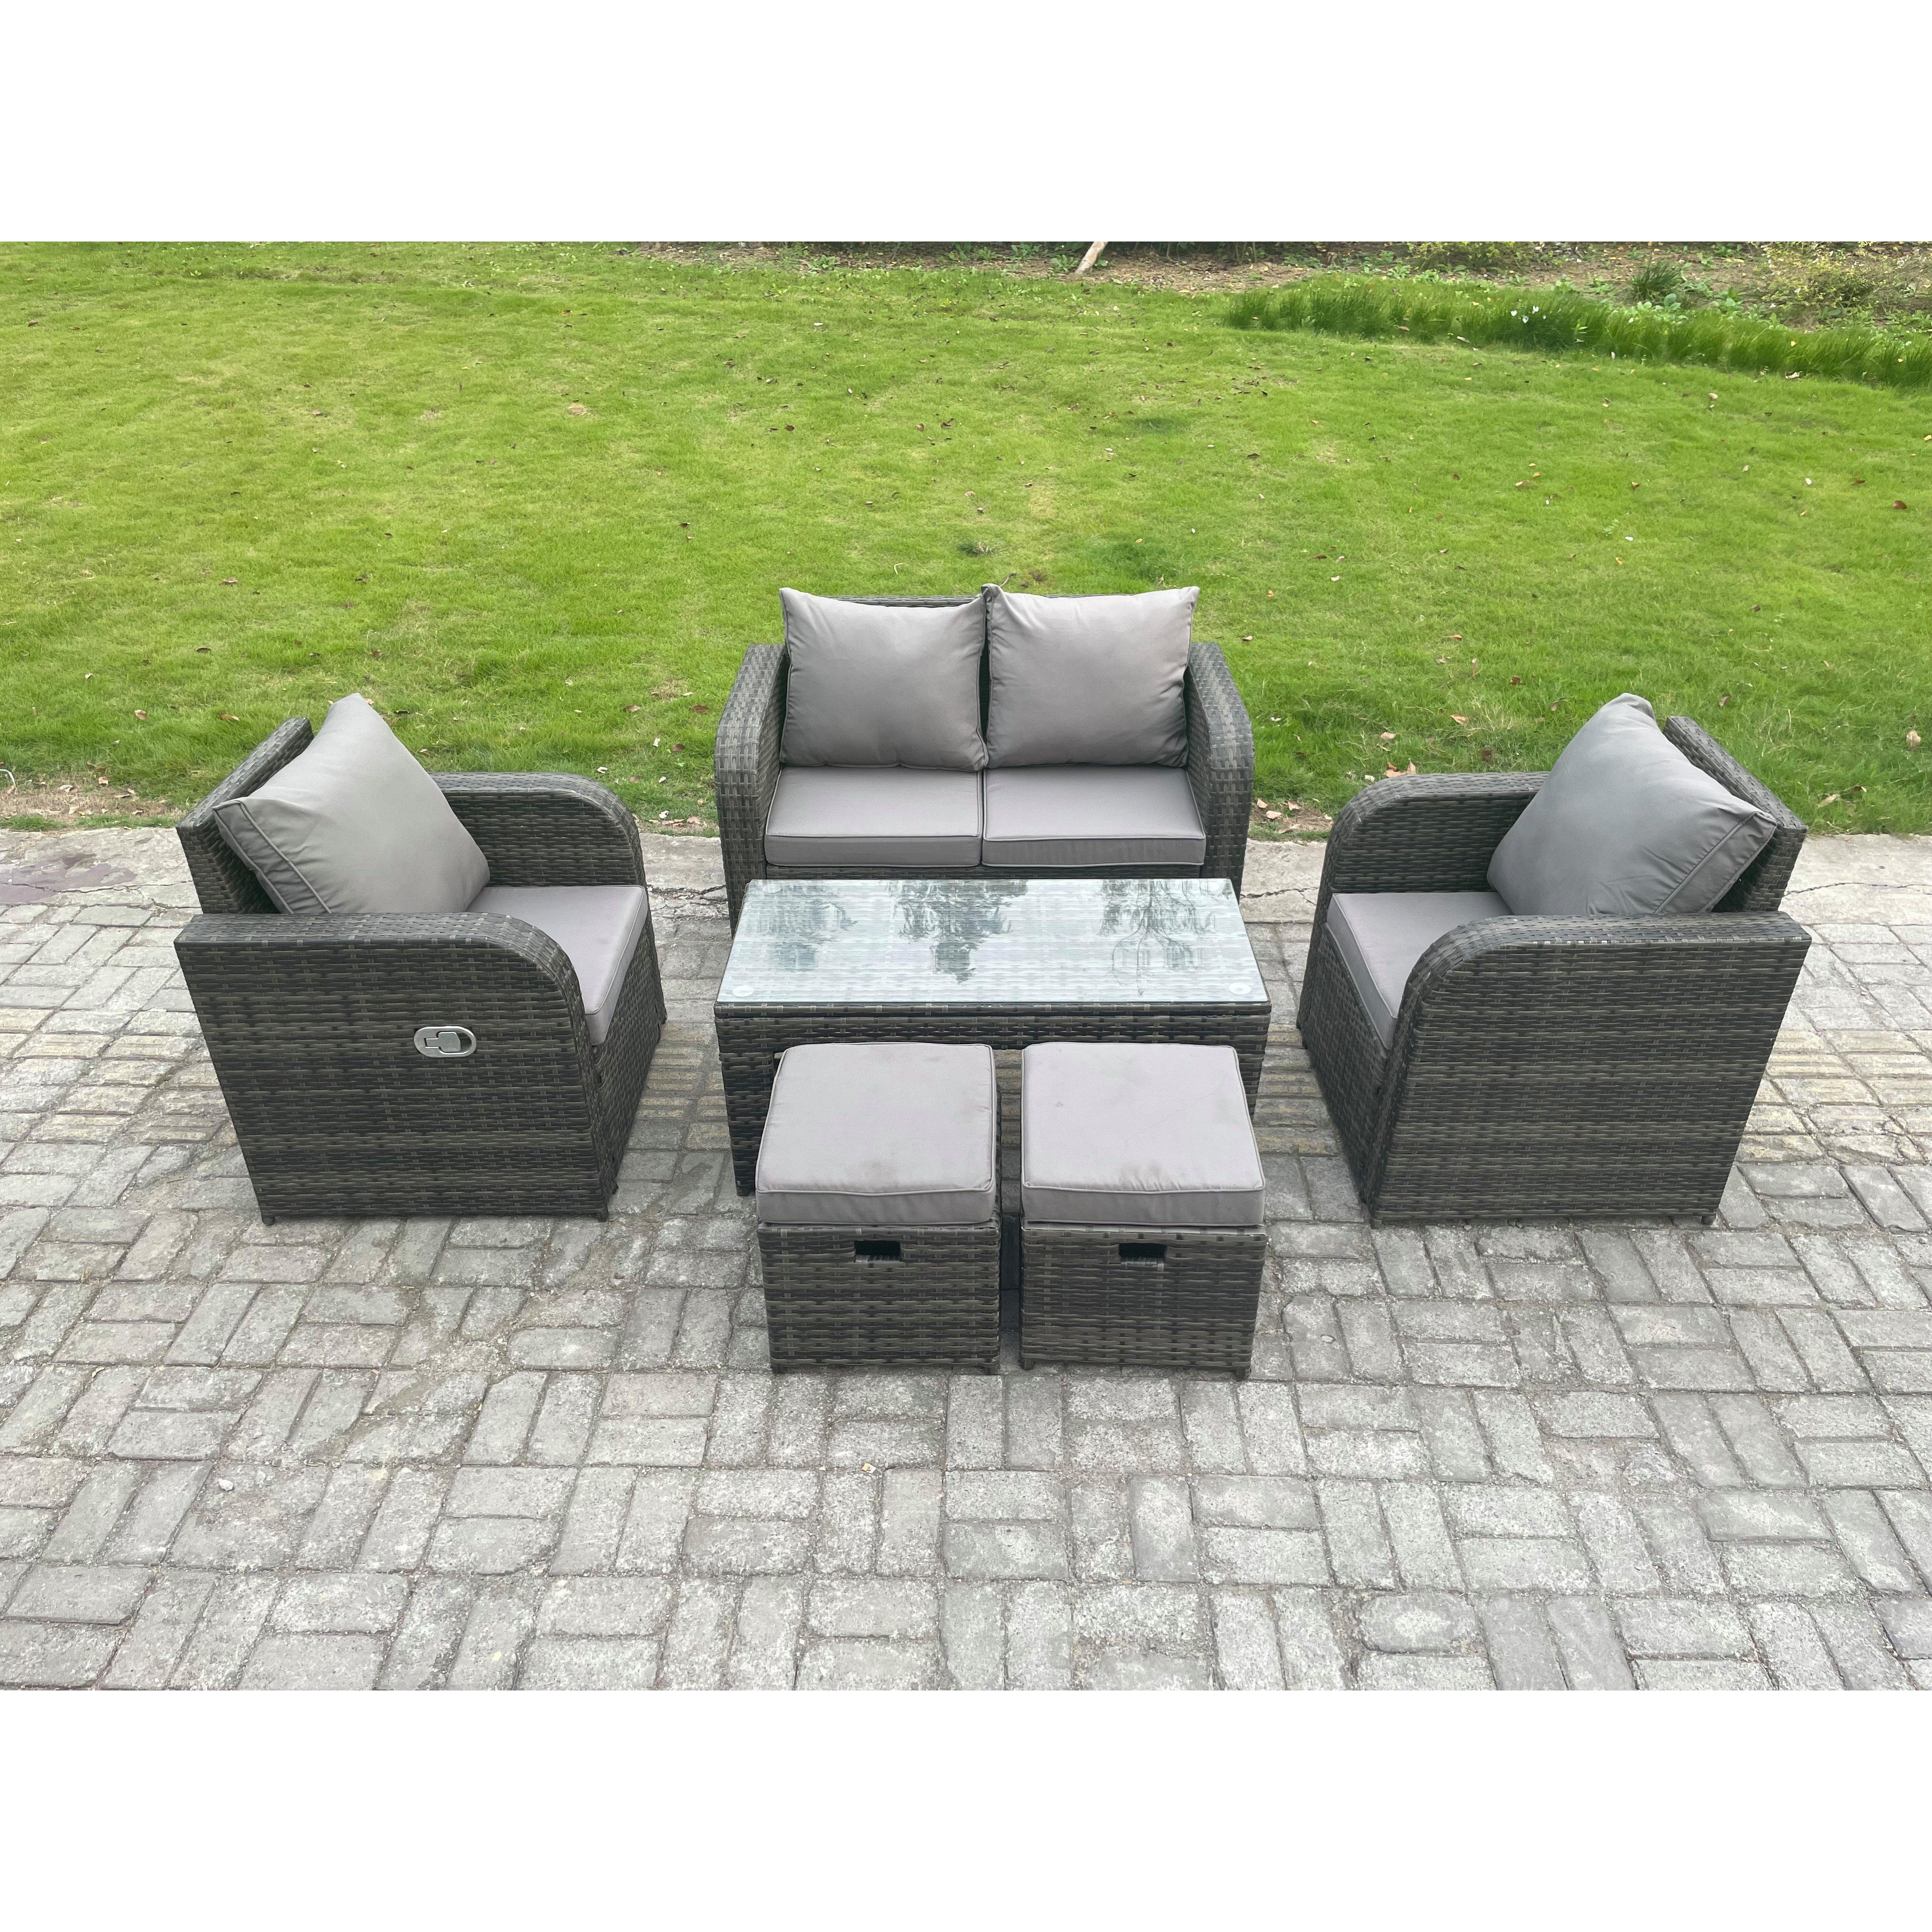 Outdoor Garden Furniture Sets 6 Seater Wicker Rattan Furniture Sofa Sets with Rectangular Coffee Table Reclining Chair - image 1